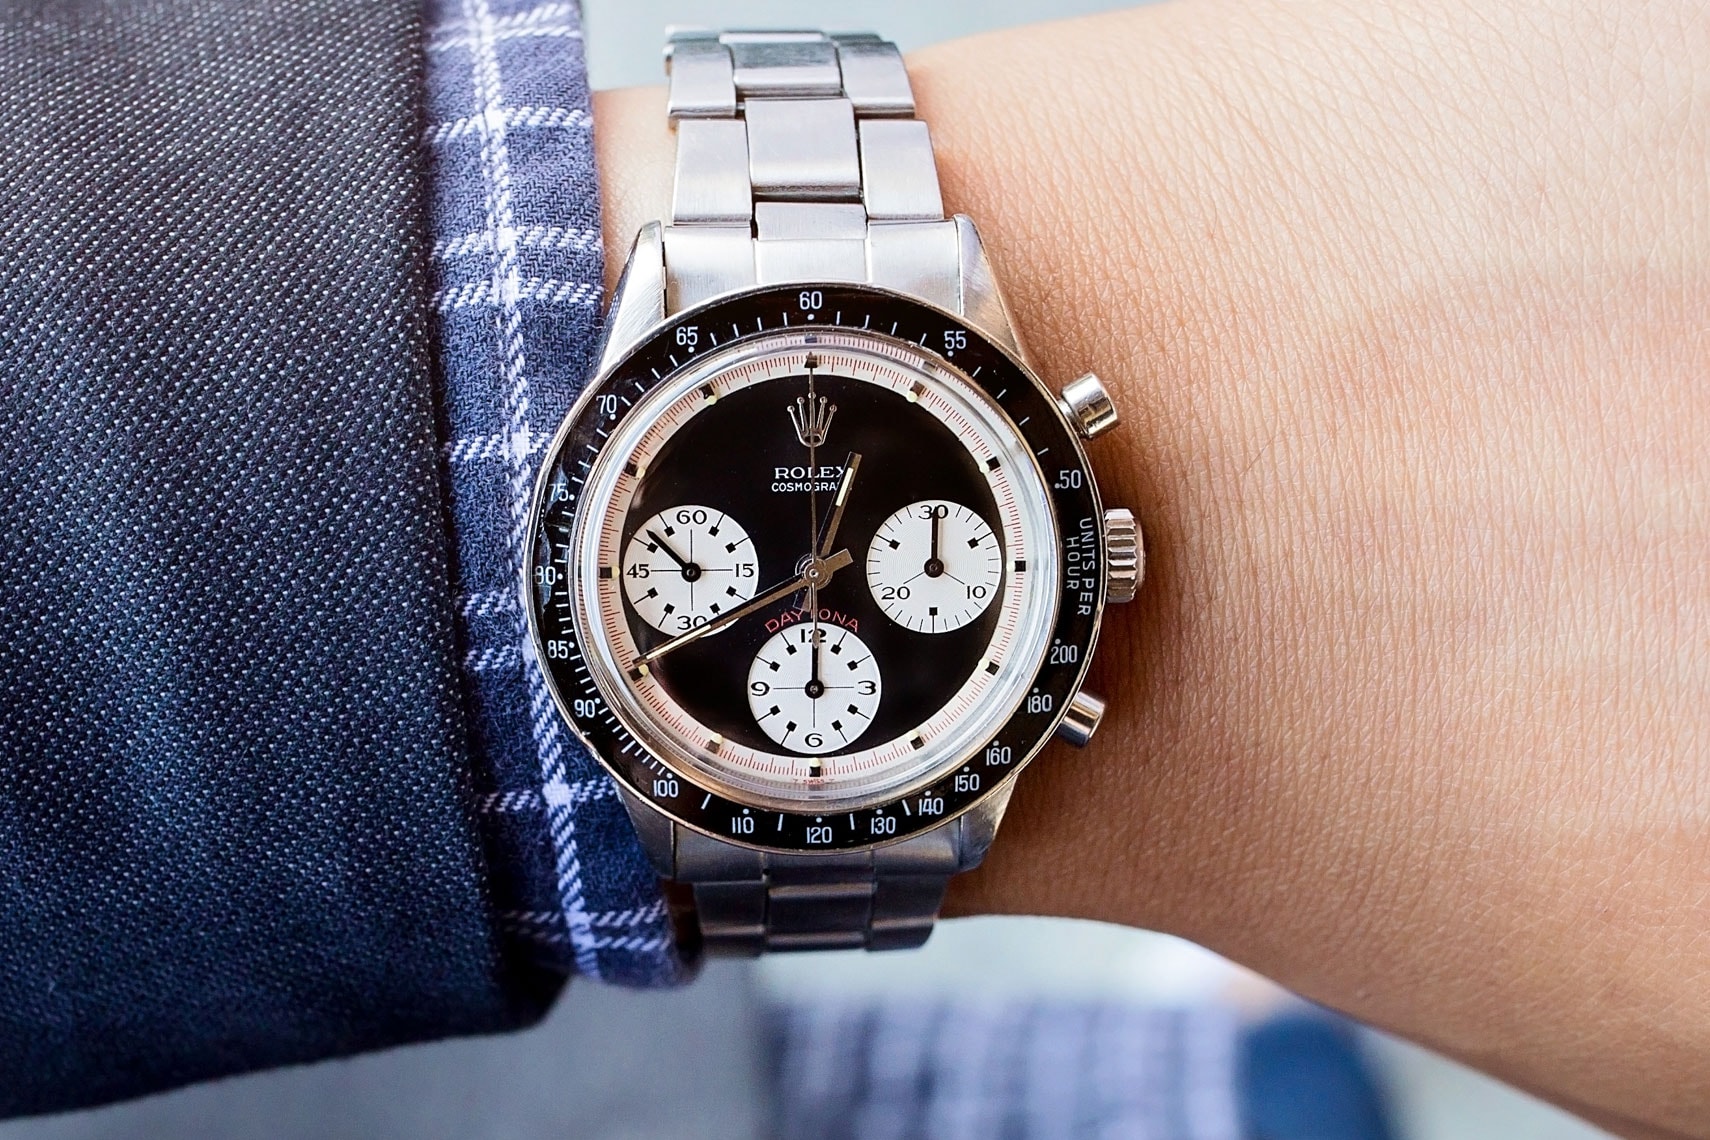 Rolex Daytona ロレックス 希少モデル “Paul Newman” Found in Couch Bob's Watches ポール ニューマン デイトナ Swiss watches Rolex Cosmograph vintage watch  オークション